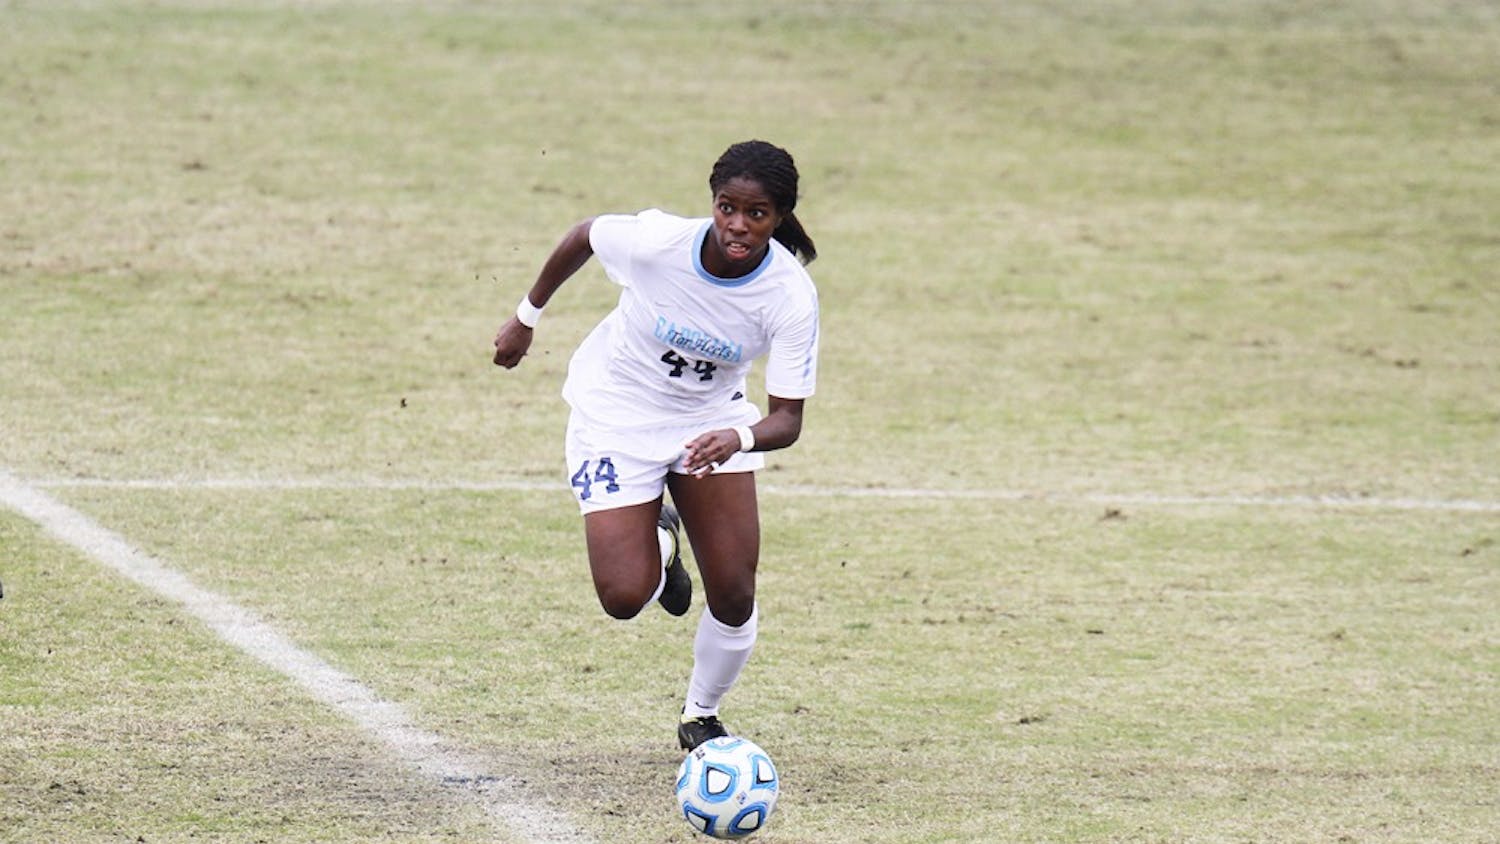 The UNC women's soccer team lost 1-0 to South Carolina at Fetzer Field on Sunday in the NCAA tournament. The Heels ended the season with a record of 14-4-2.